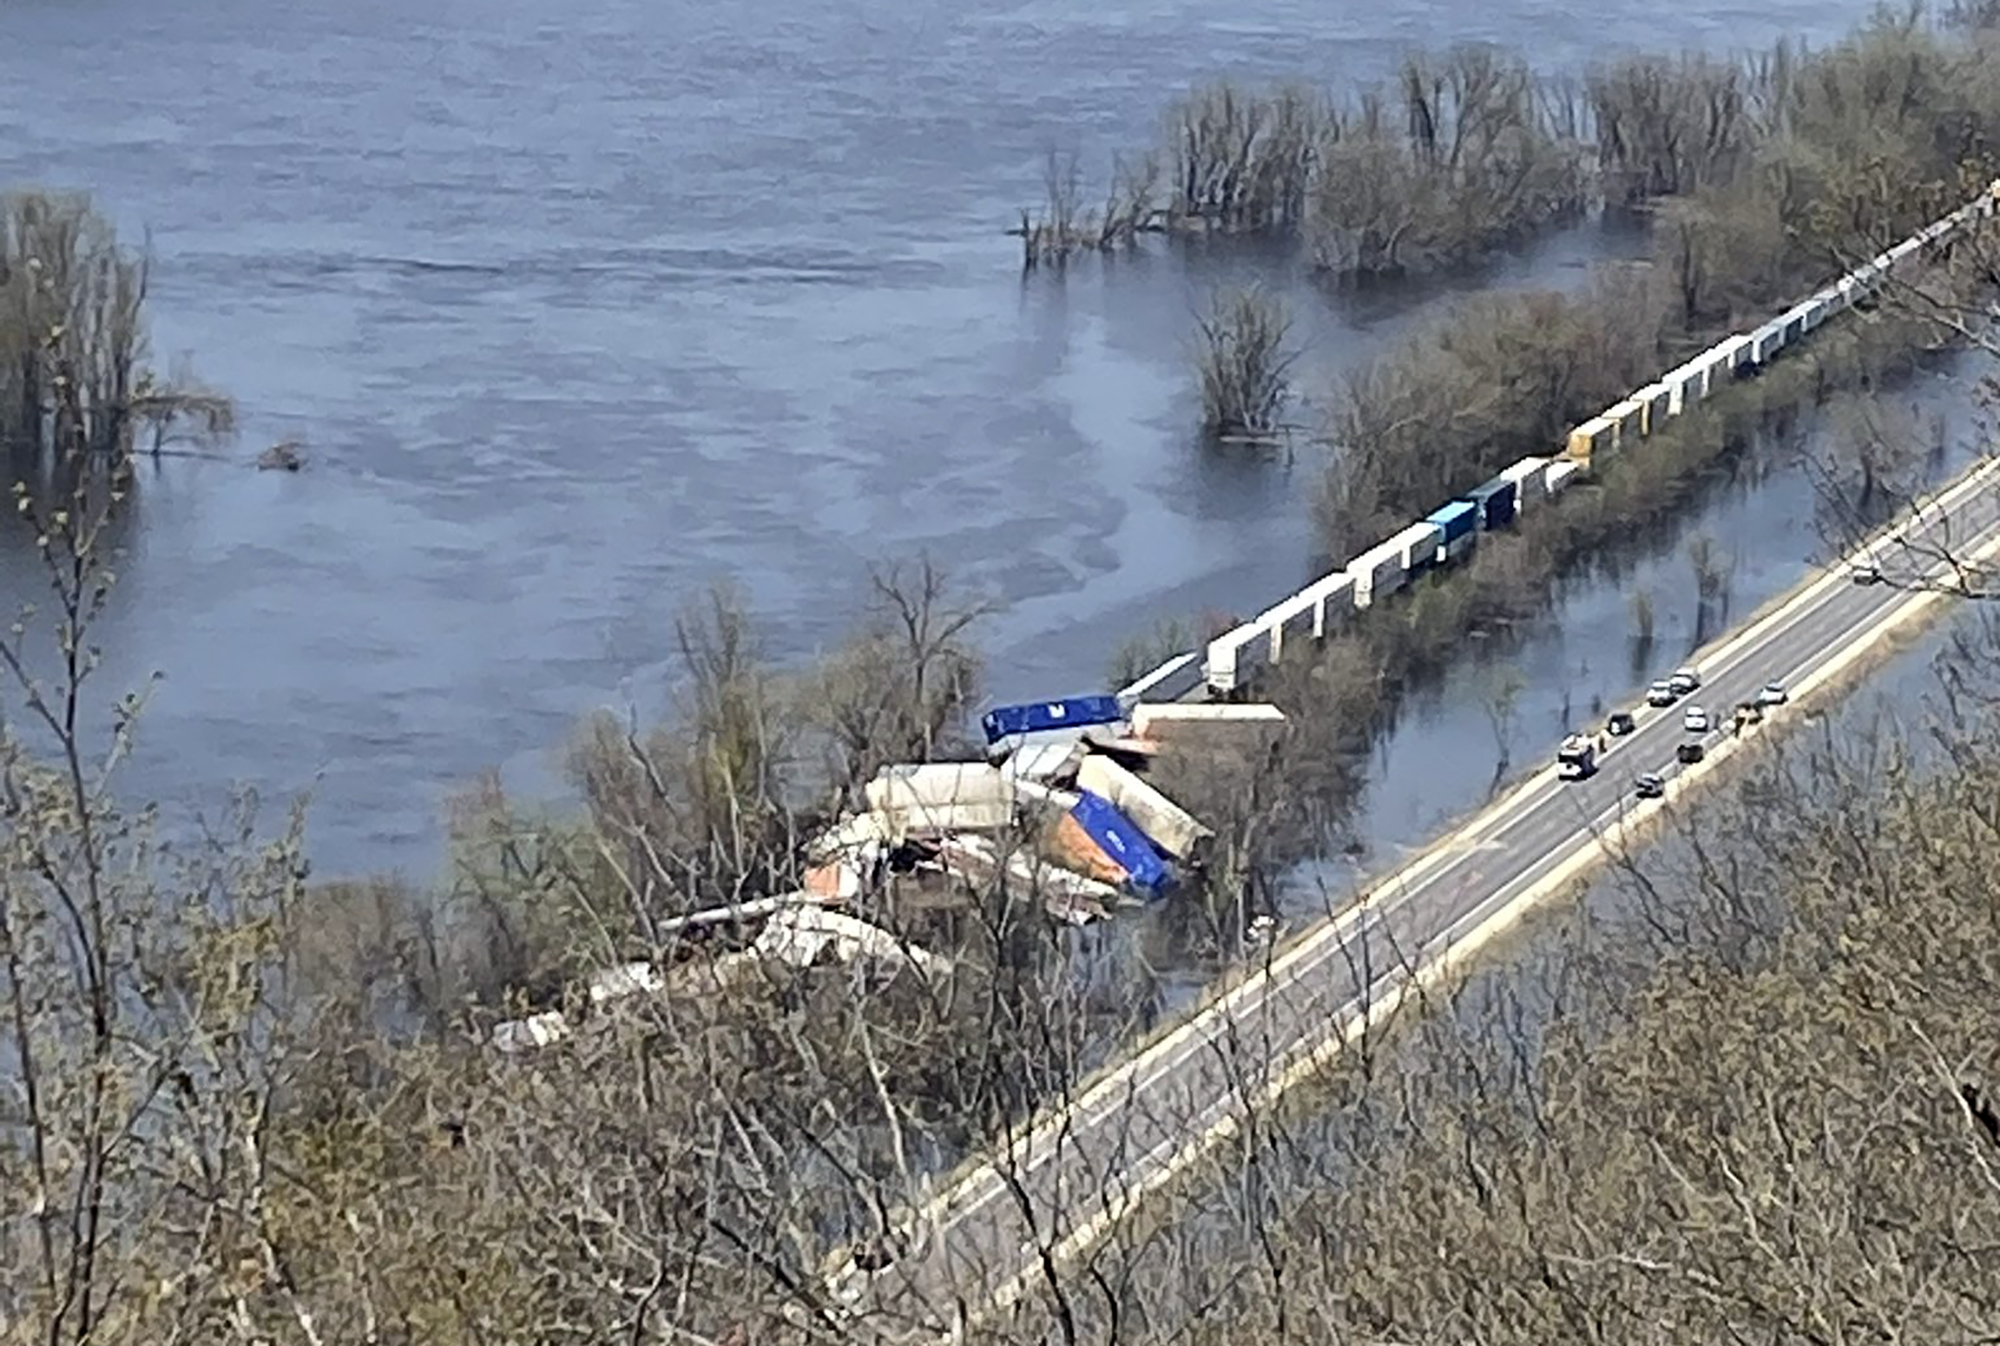 Cleanup underway following derailment that sent cars into flooded Mississippi River